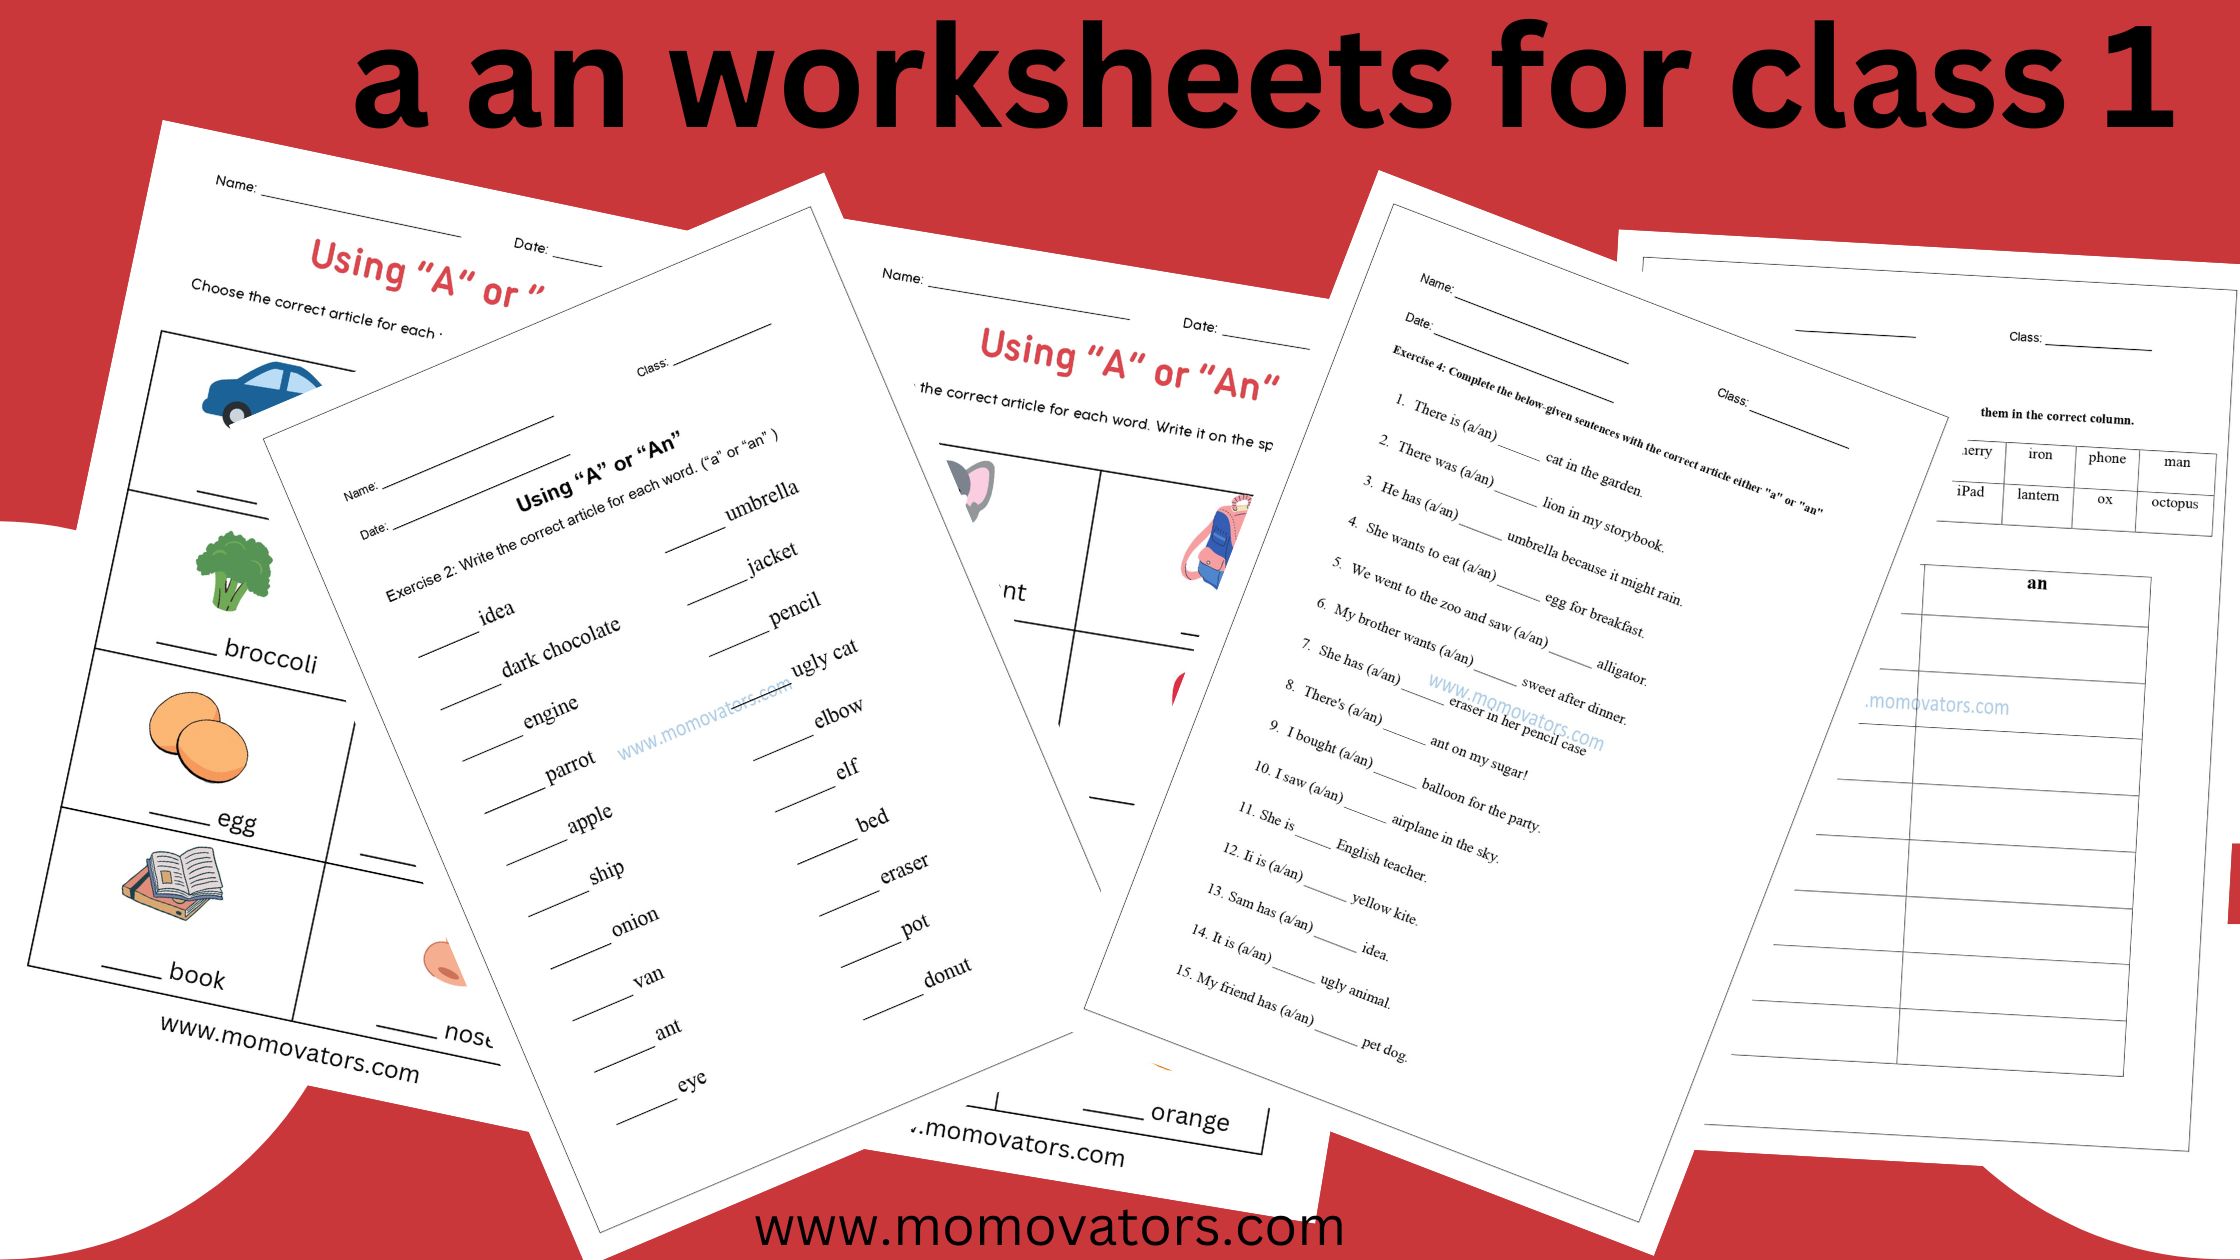 a and an worksheet for grade1 pdf @momovators